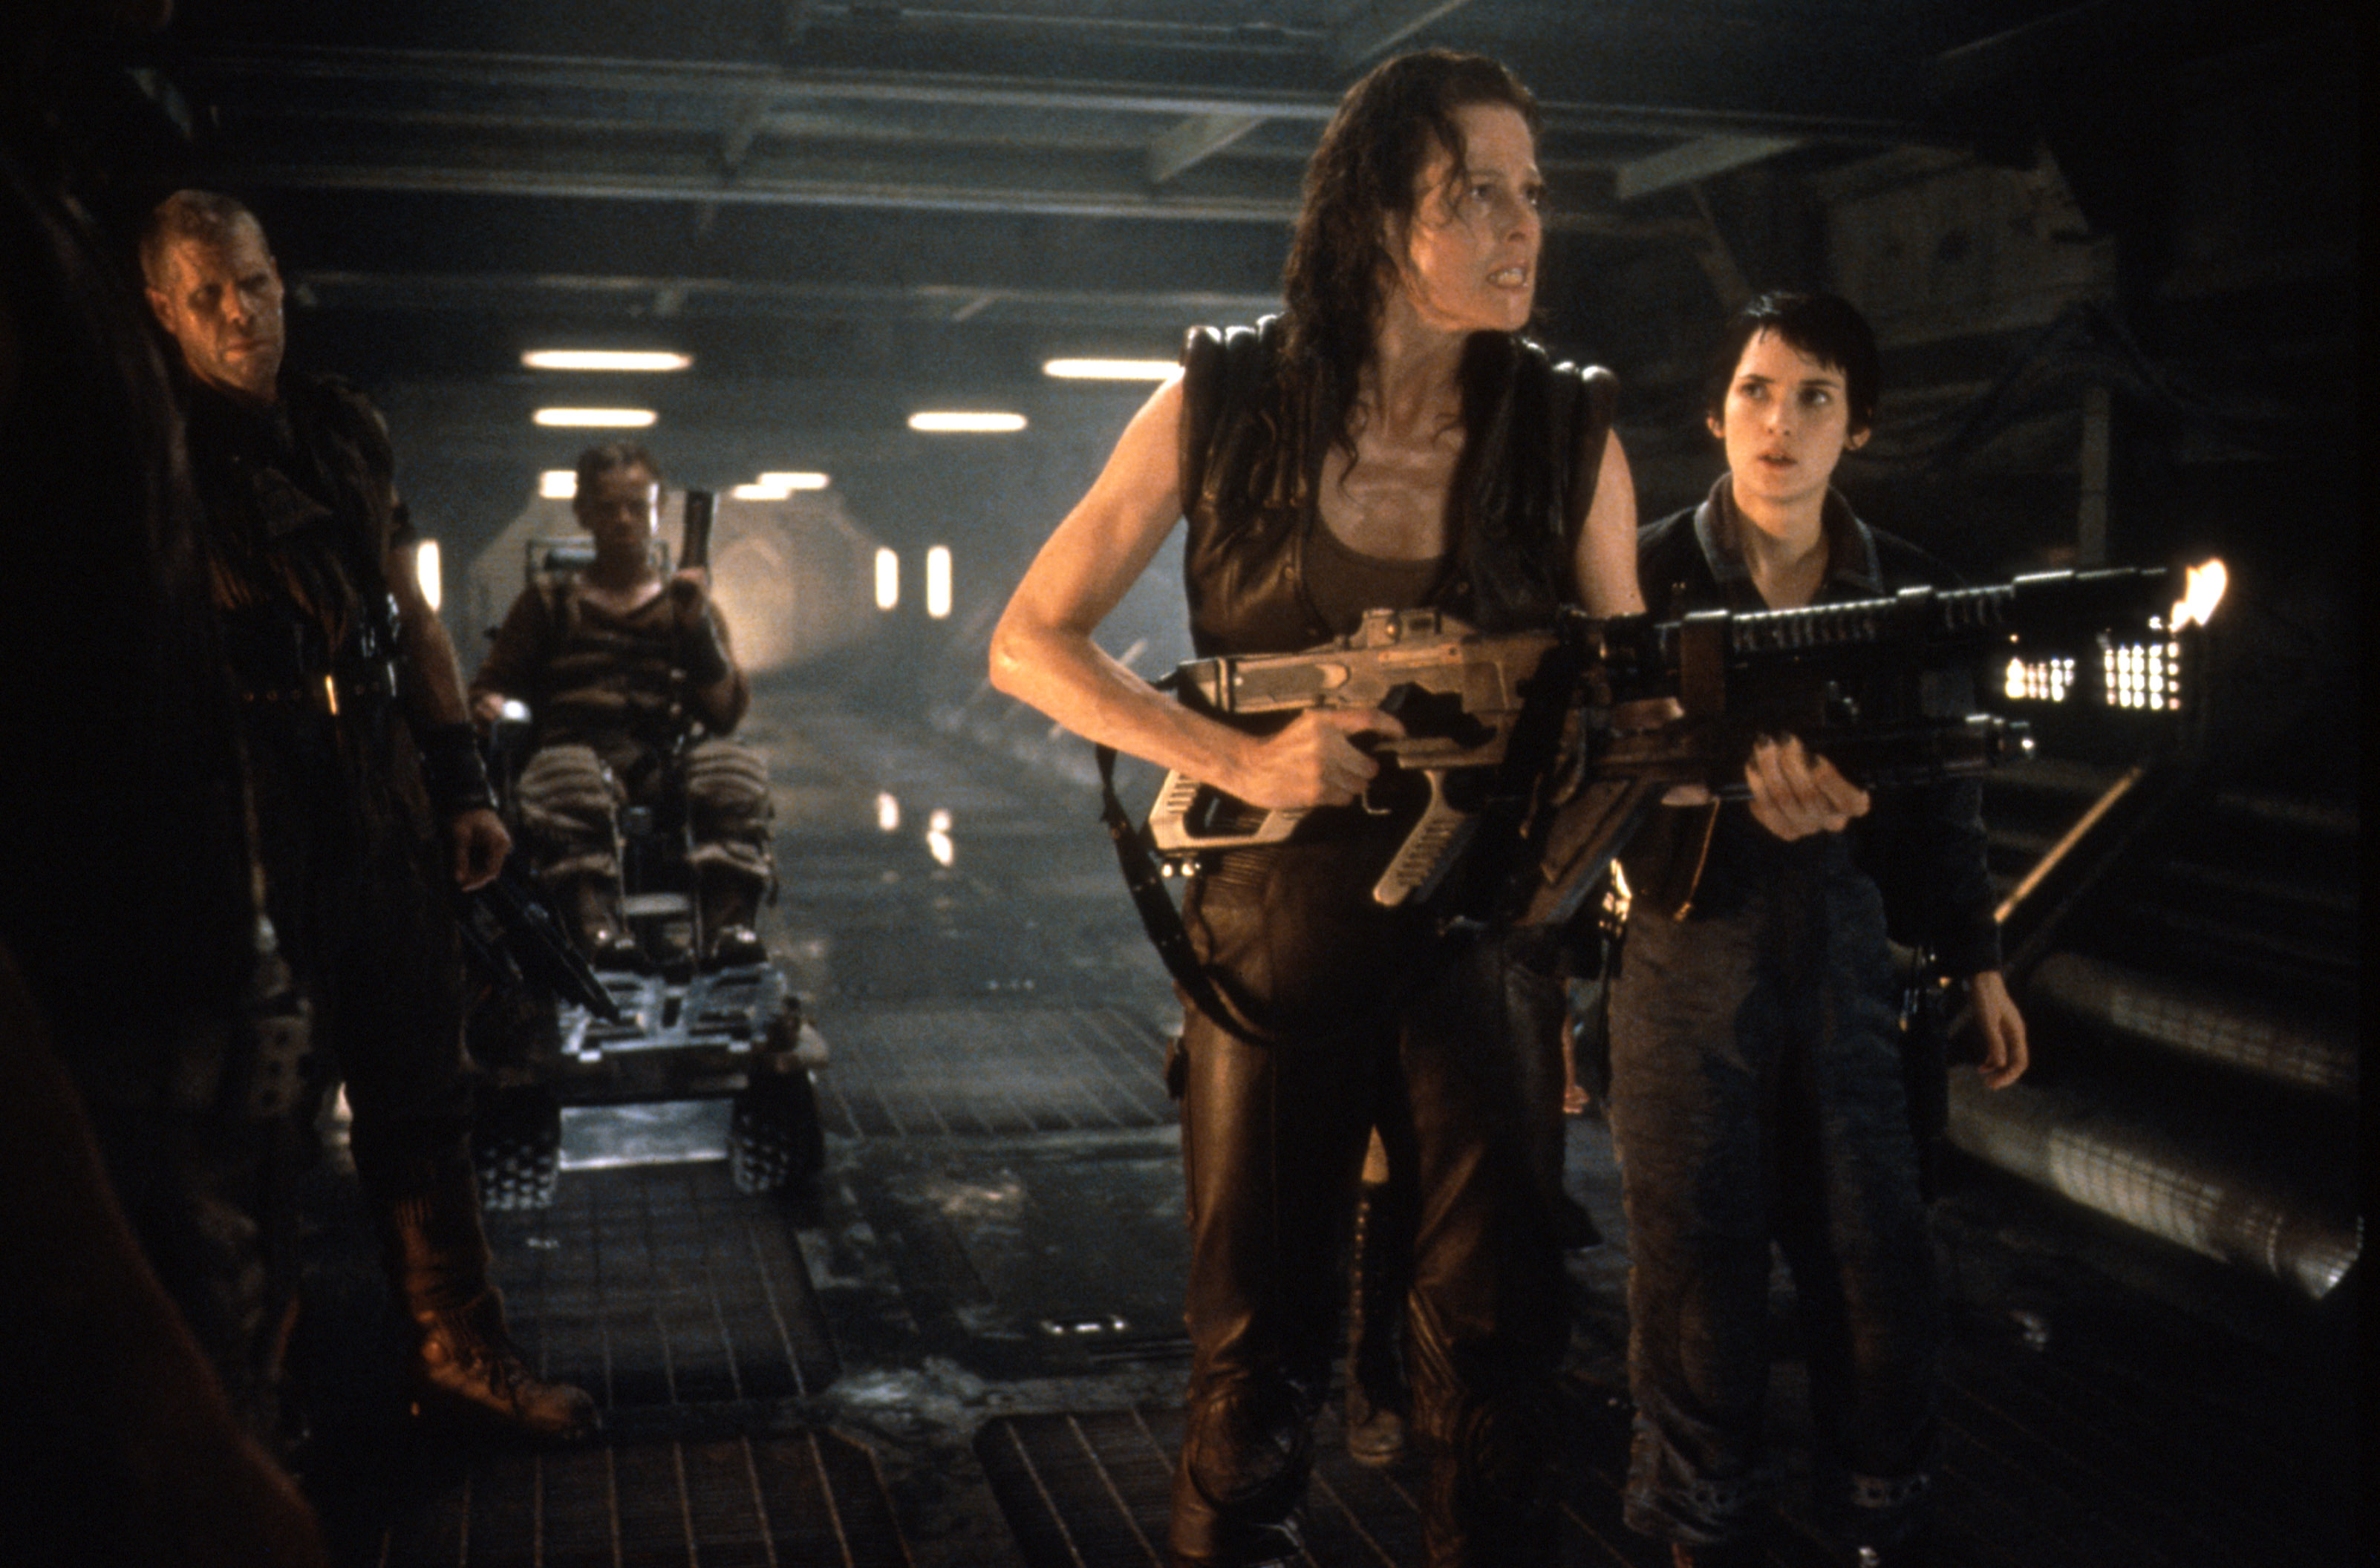 (l to r) Johner (Ron Perlman), Vreiss (Dominique Pinon), Ripley (Sigourney Weaver) and Annalee (Winona Ryder) make their way through the ship in Alien: Resurrection (1997)